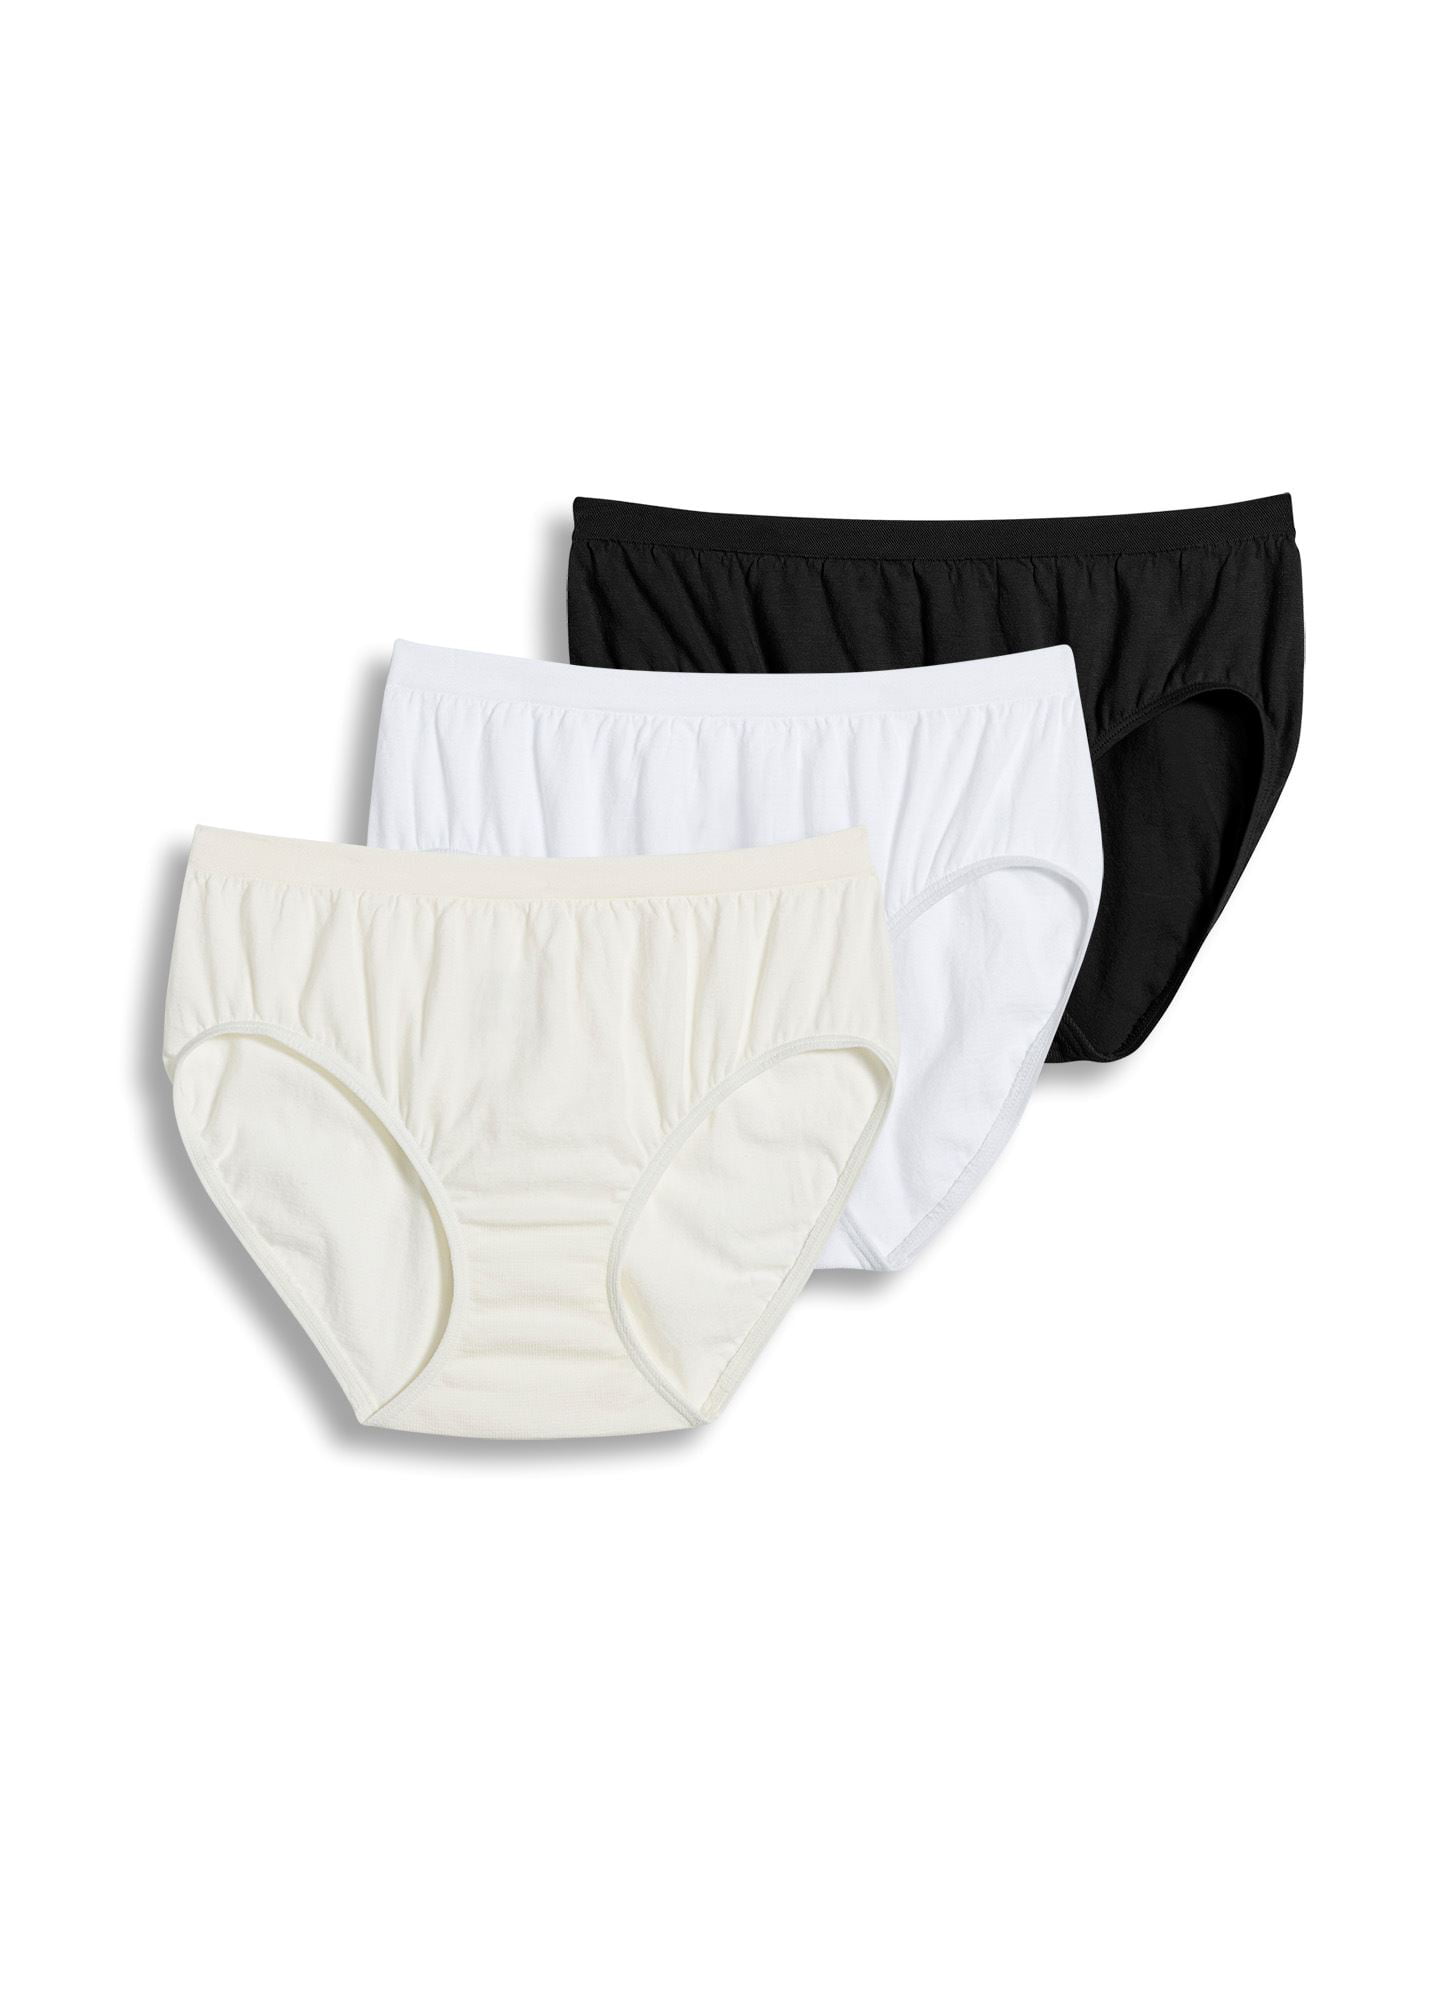 Lower Prices for Everyone Jockey Womens Underwear Comfies Cotton ...